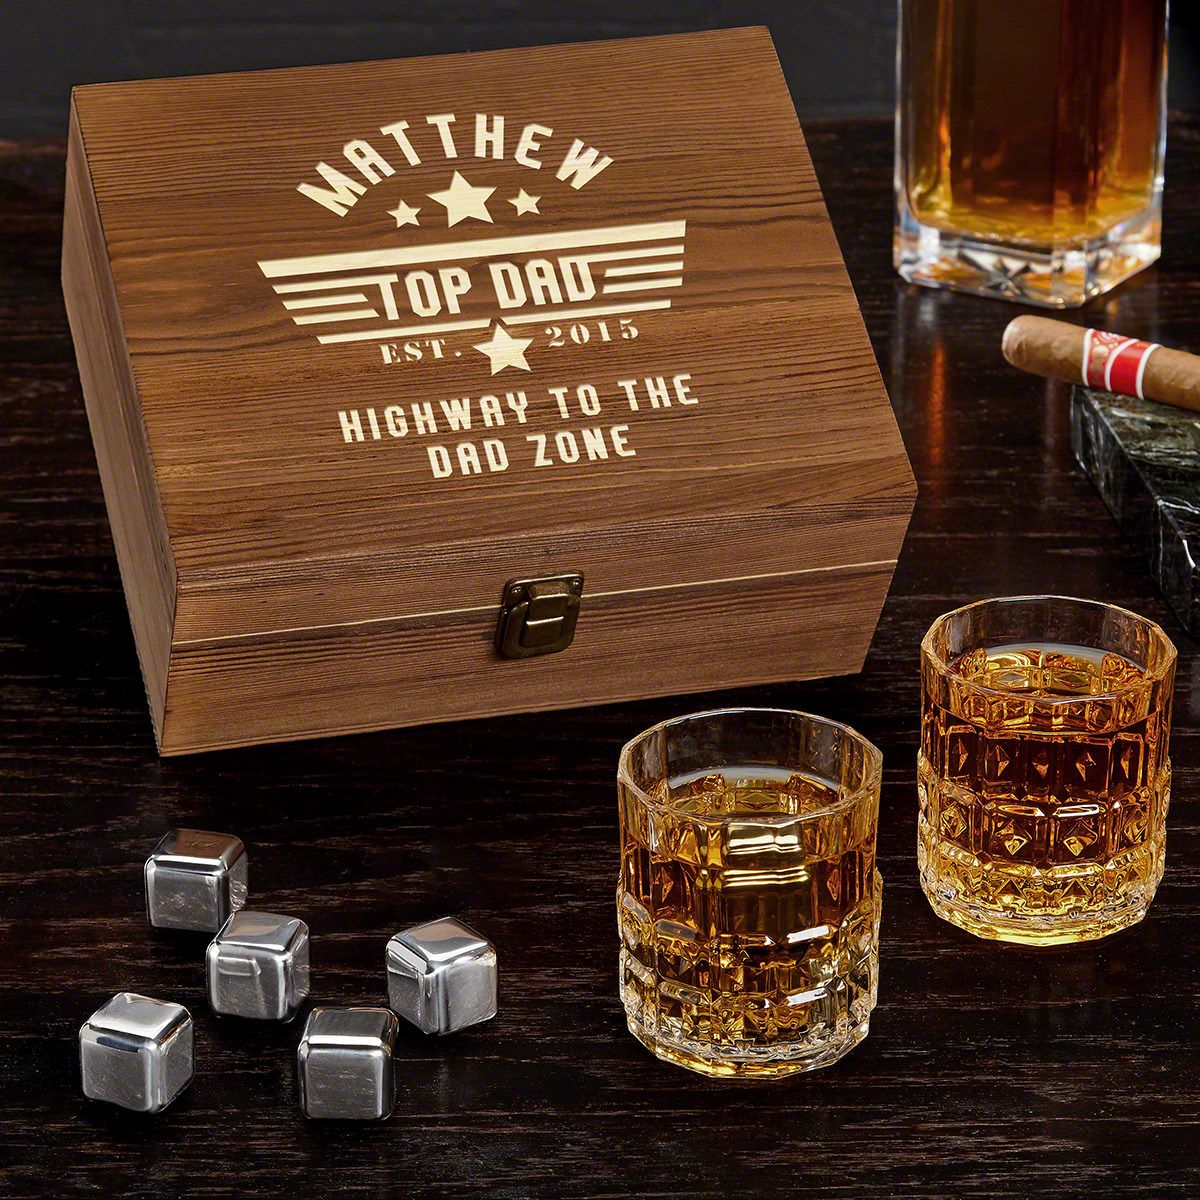 Top Dad Engraved Whiskey Stone Box Set Gift for Dad